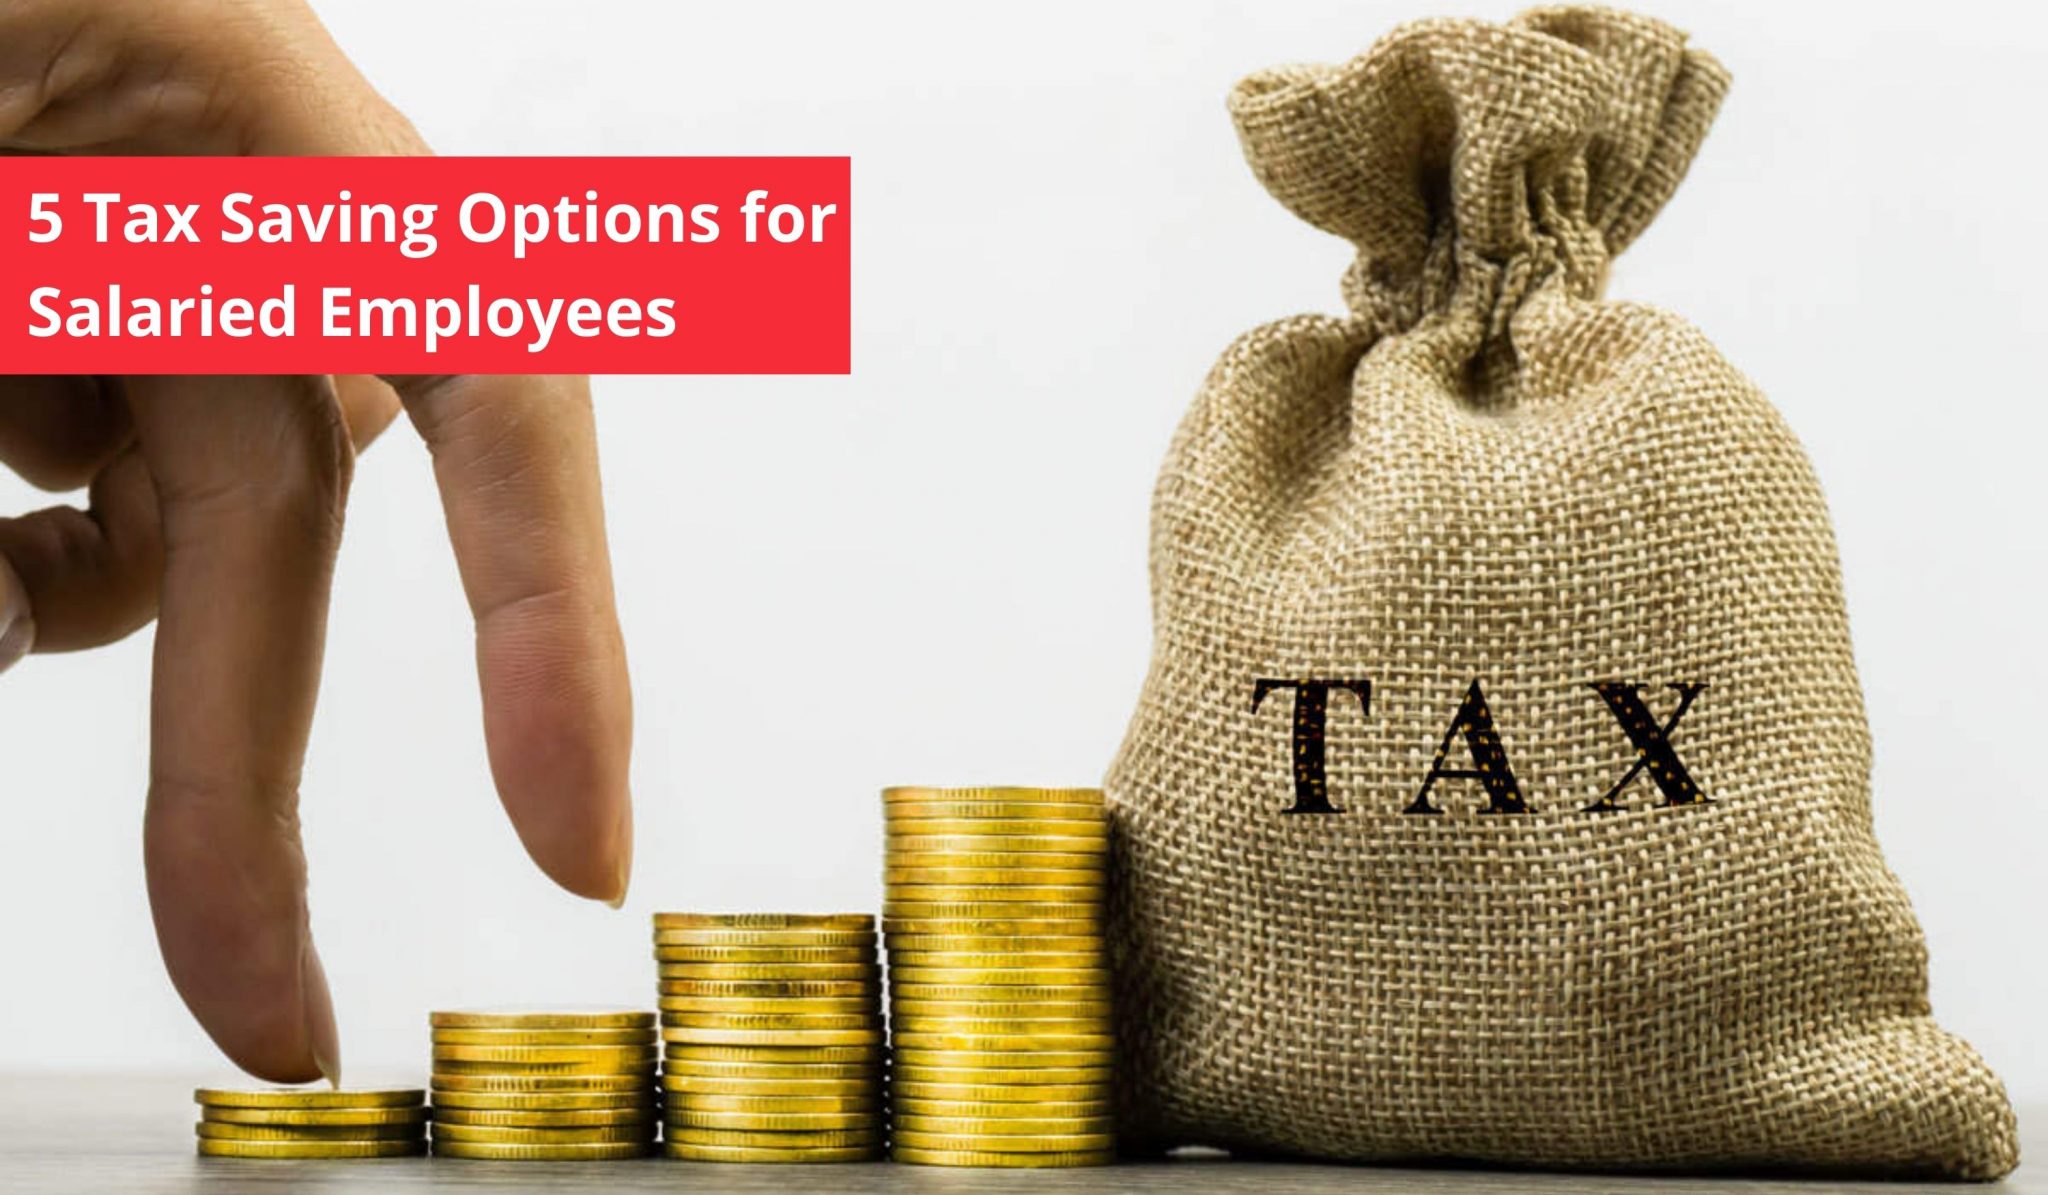 5-tax-saving-options-for-salaried-employees-zaggle-save-employee